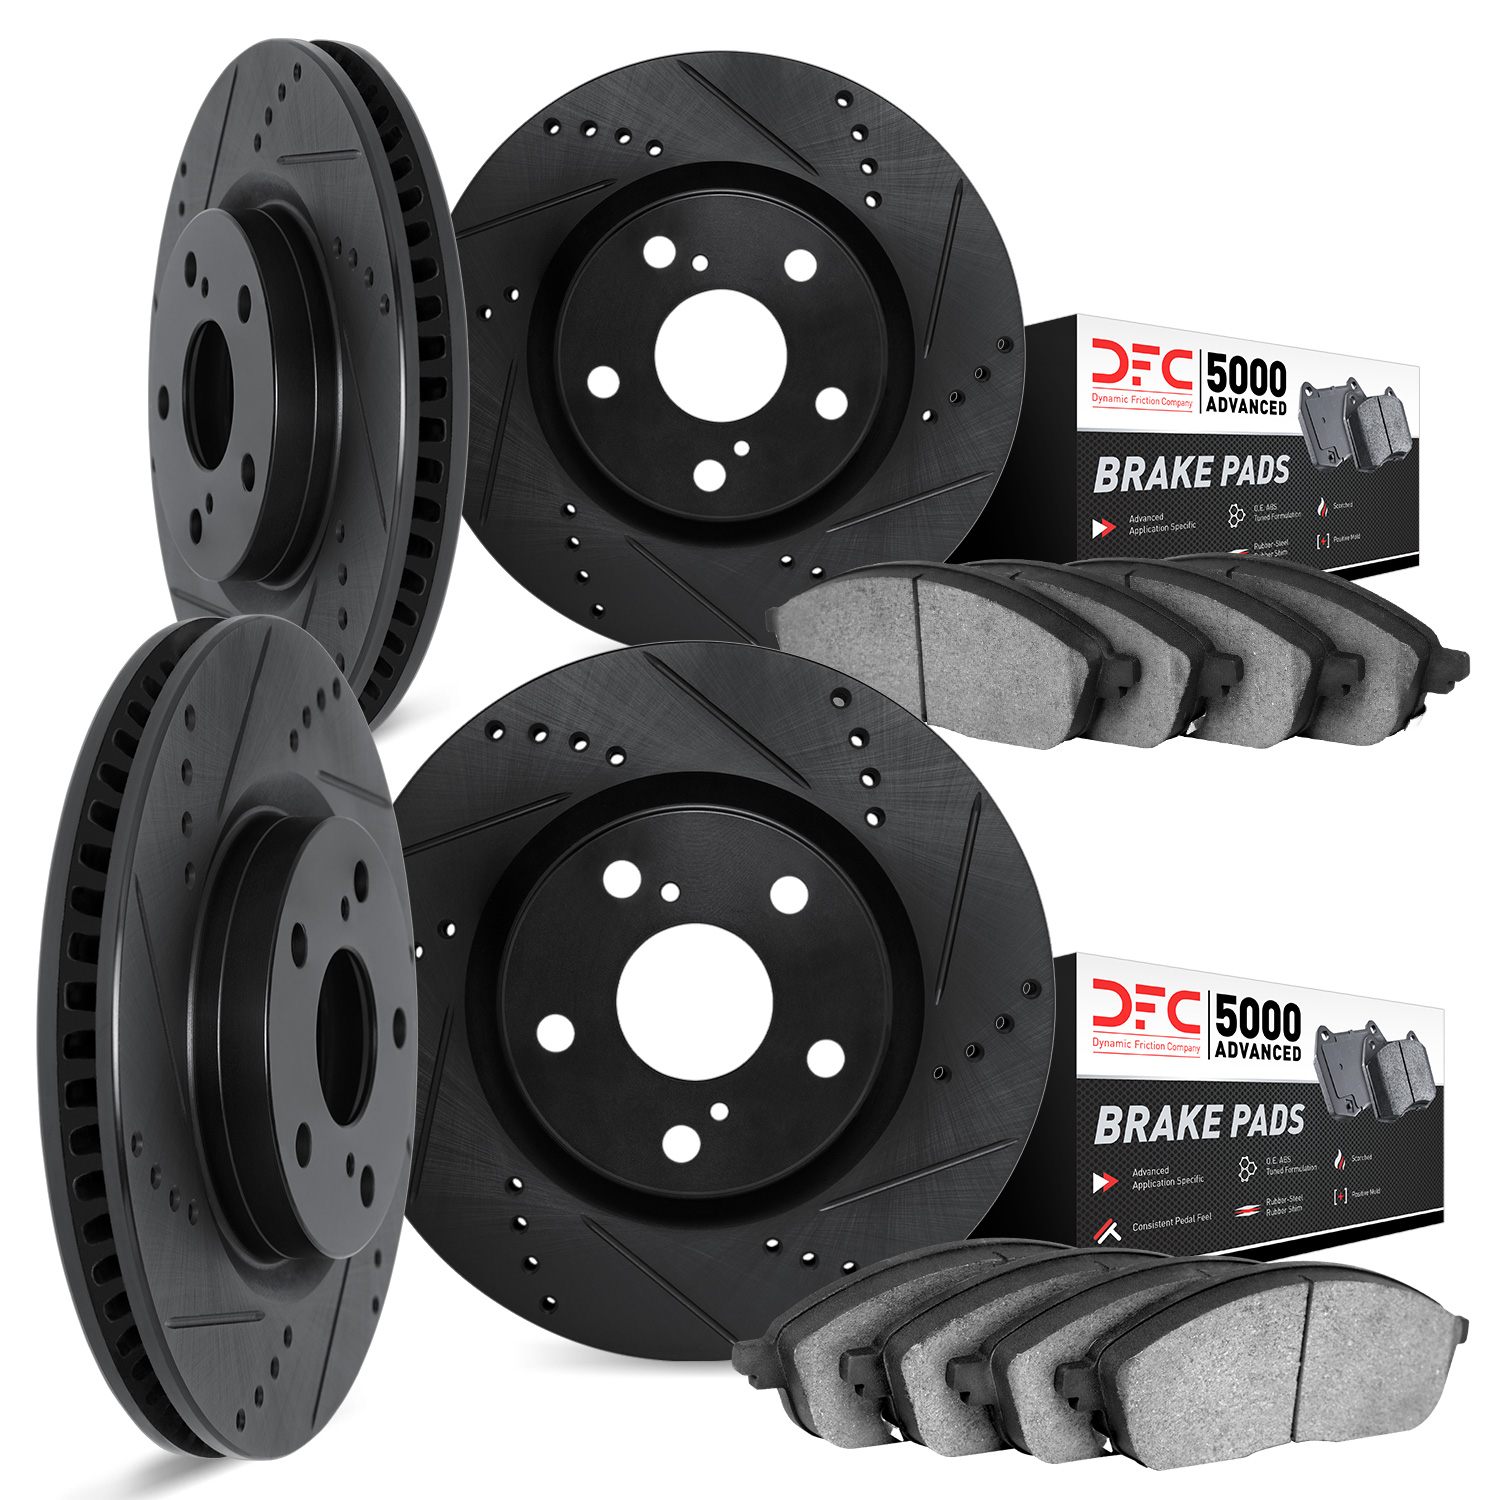 8504-54403 Drilled/Slotted Brake Rotors w/5000 Advanced Brake Pads Kit [Black], Fits Select Ford/Lincoln/Mercury/Mazda, Position